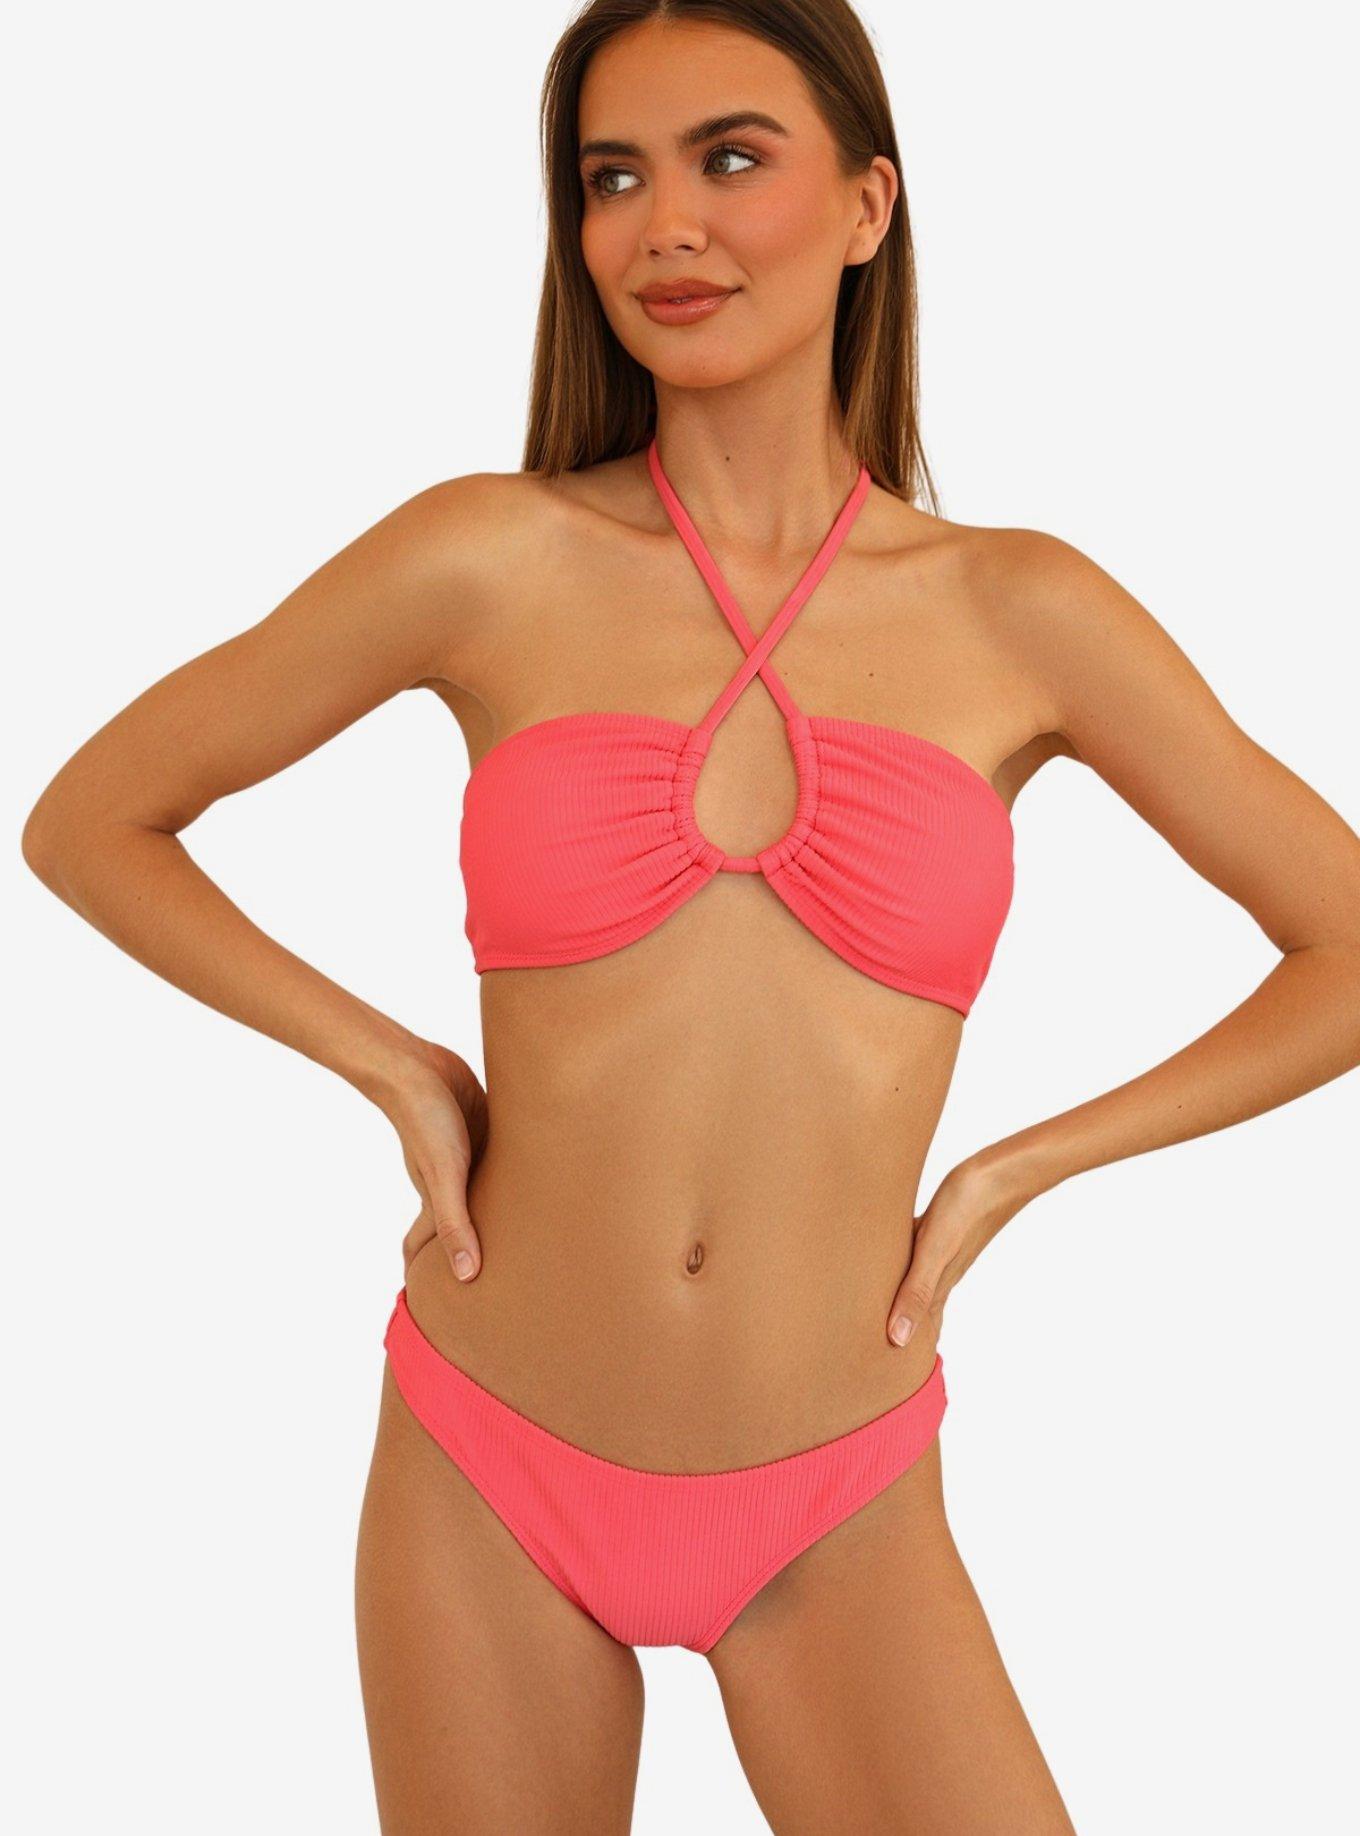 Dippin' Daisy's Nocturnal Swim Bottom Calypso Coral Pink Ribbed, CORAL PINK-CORAL, hi-res